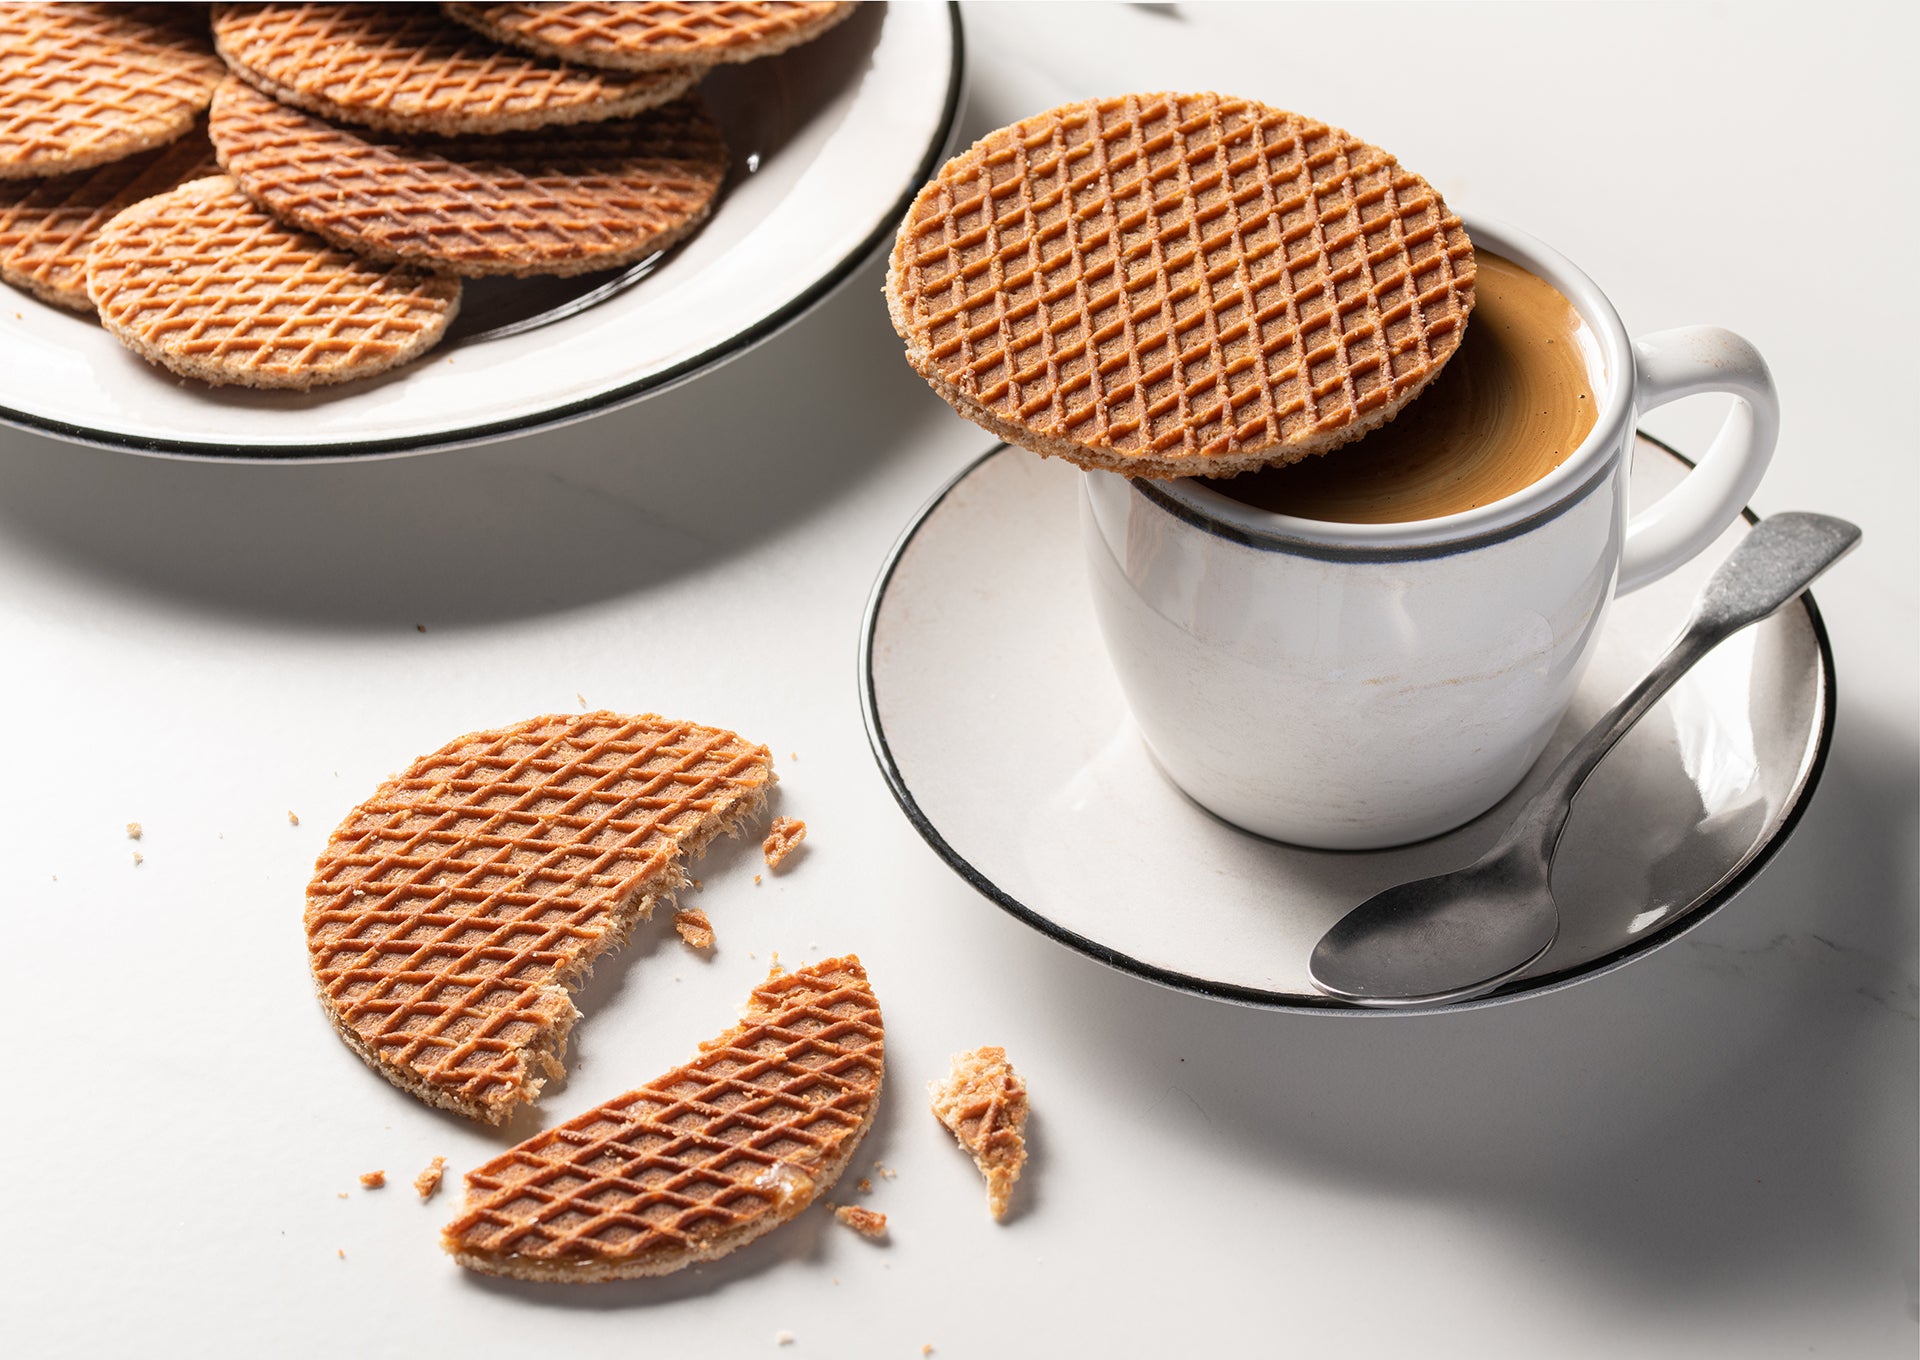 A cup of coffee and Double Authentic Red Stroopwafel Tin Cans by Wonderen Stroopwafels on a white plate.